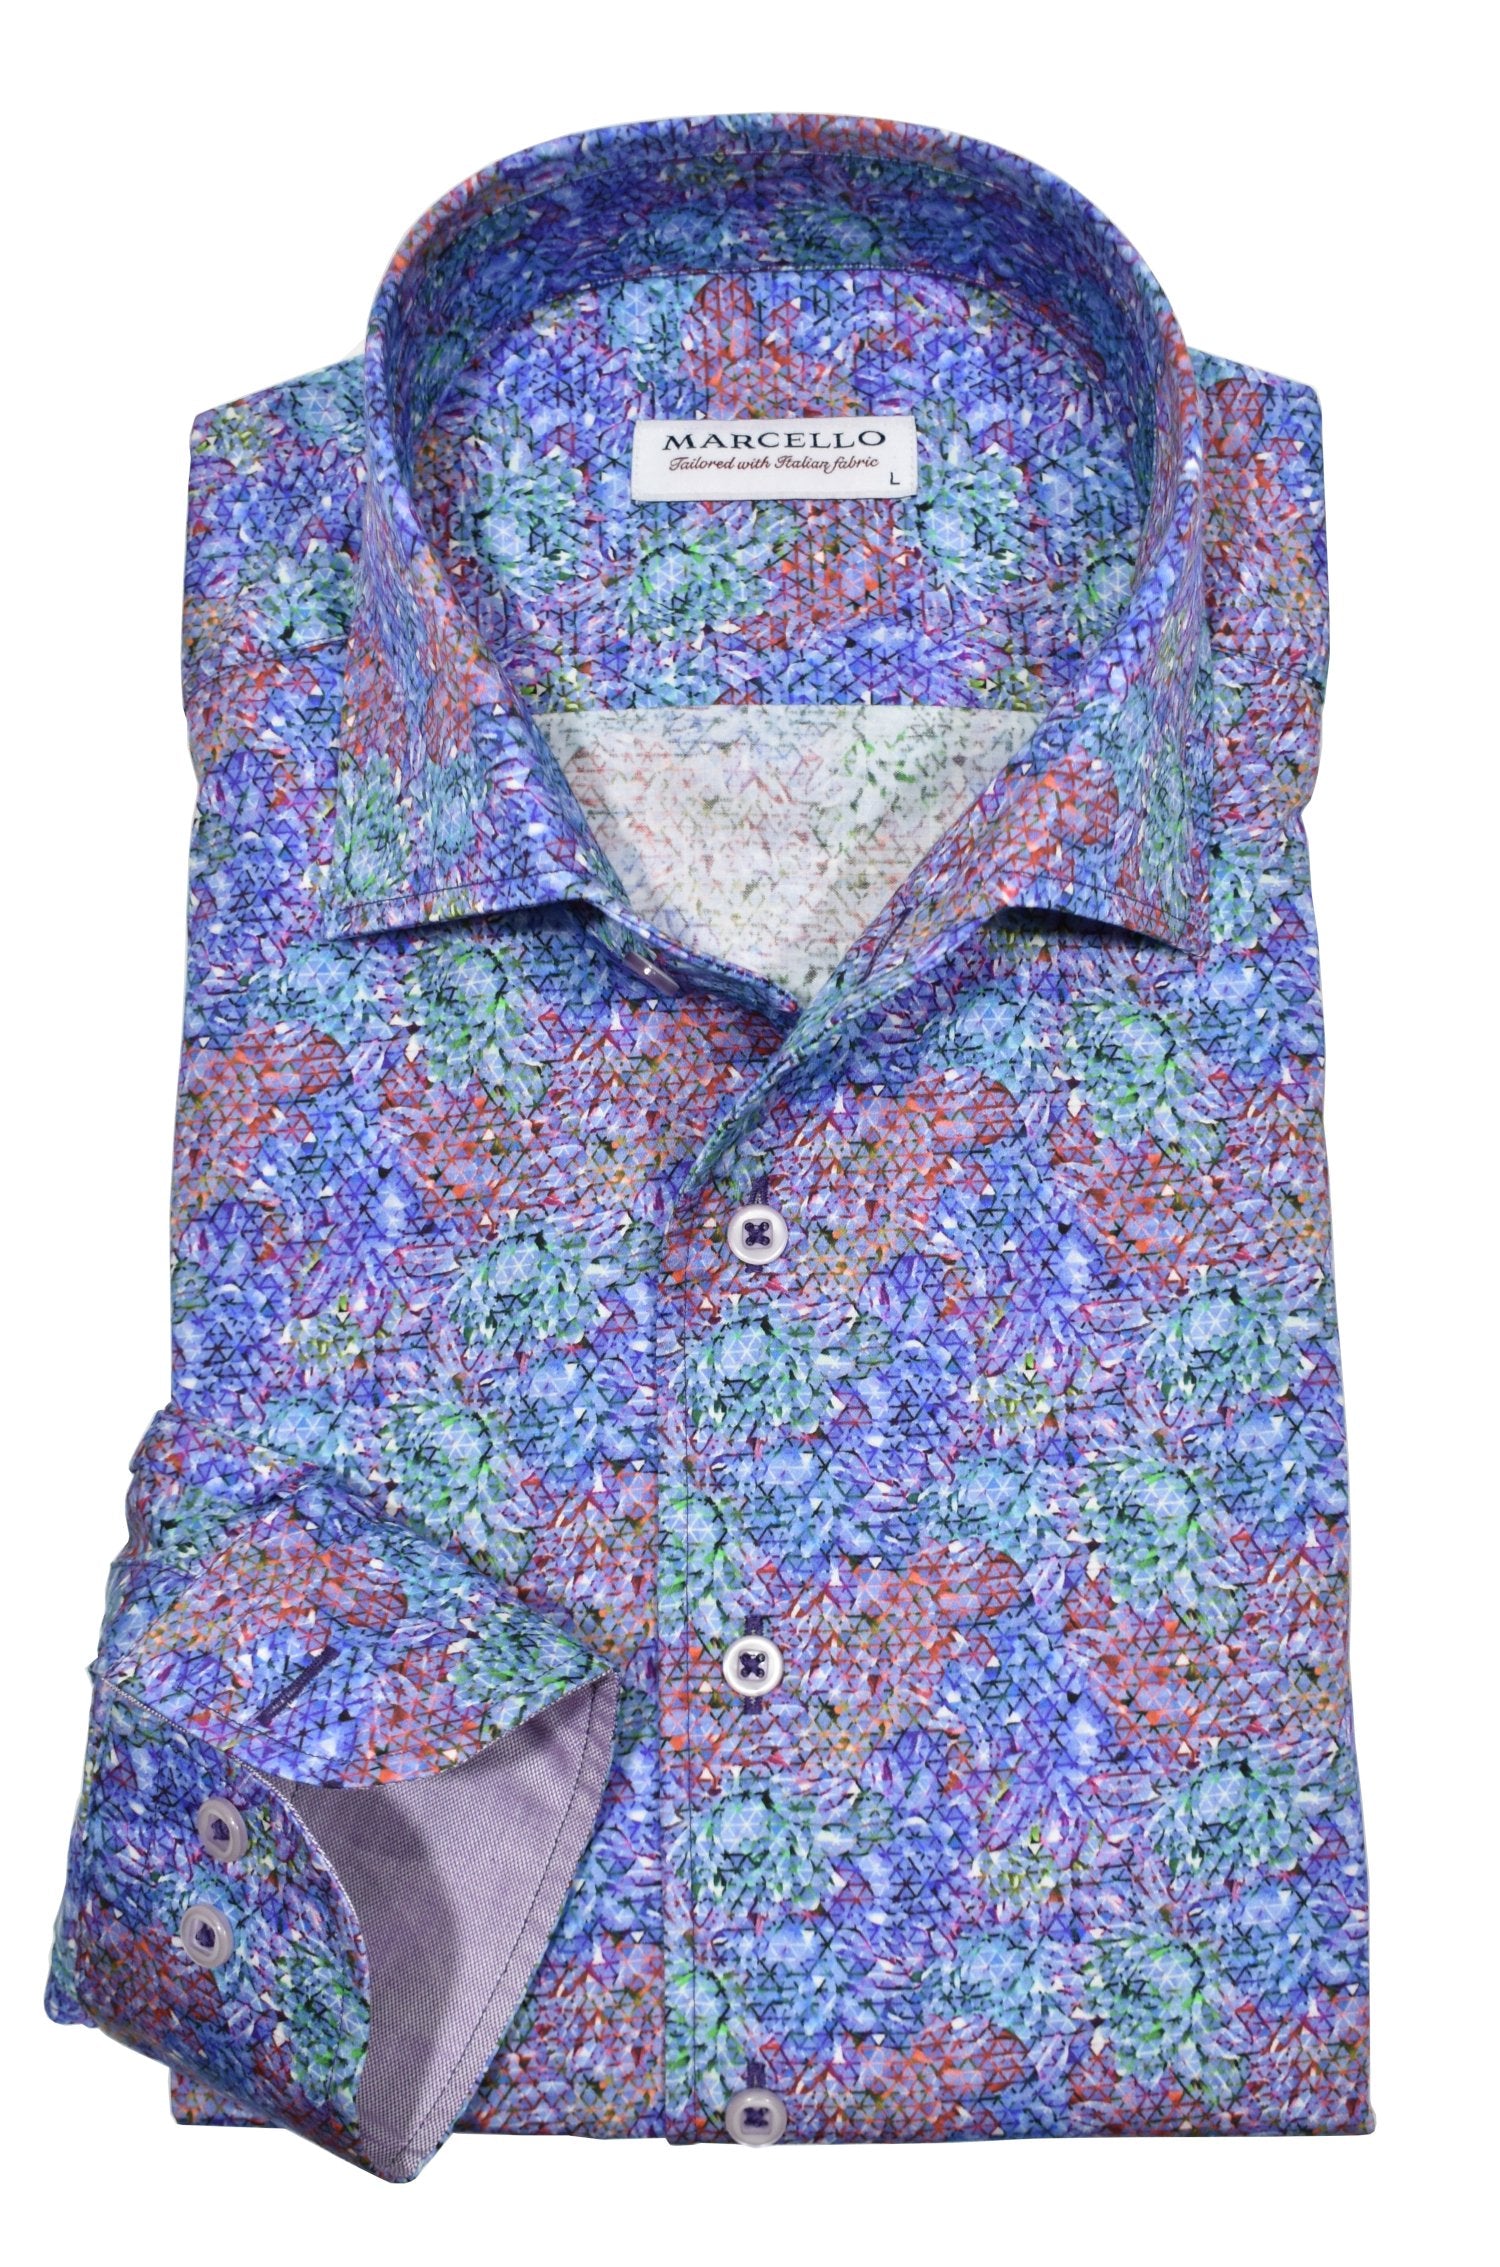 Elevate your style with the Marcello Multi Scope Roll Collar Shirt. Featuring a Marcello exclusive one piece roll collar, this multi geometric plum and blue patterned abstract shirt is accented with custom details. Exude style and sophistication with this must-have piece.